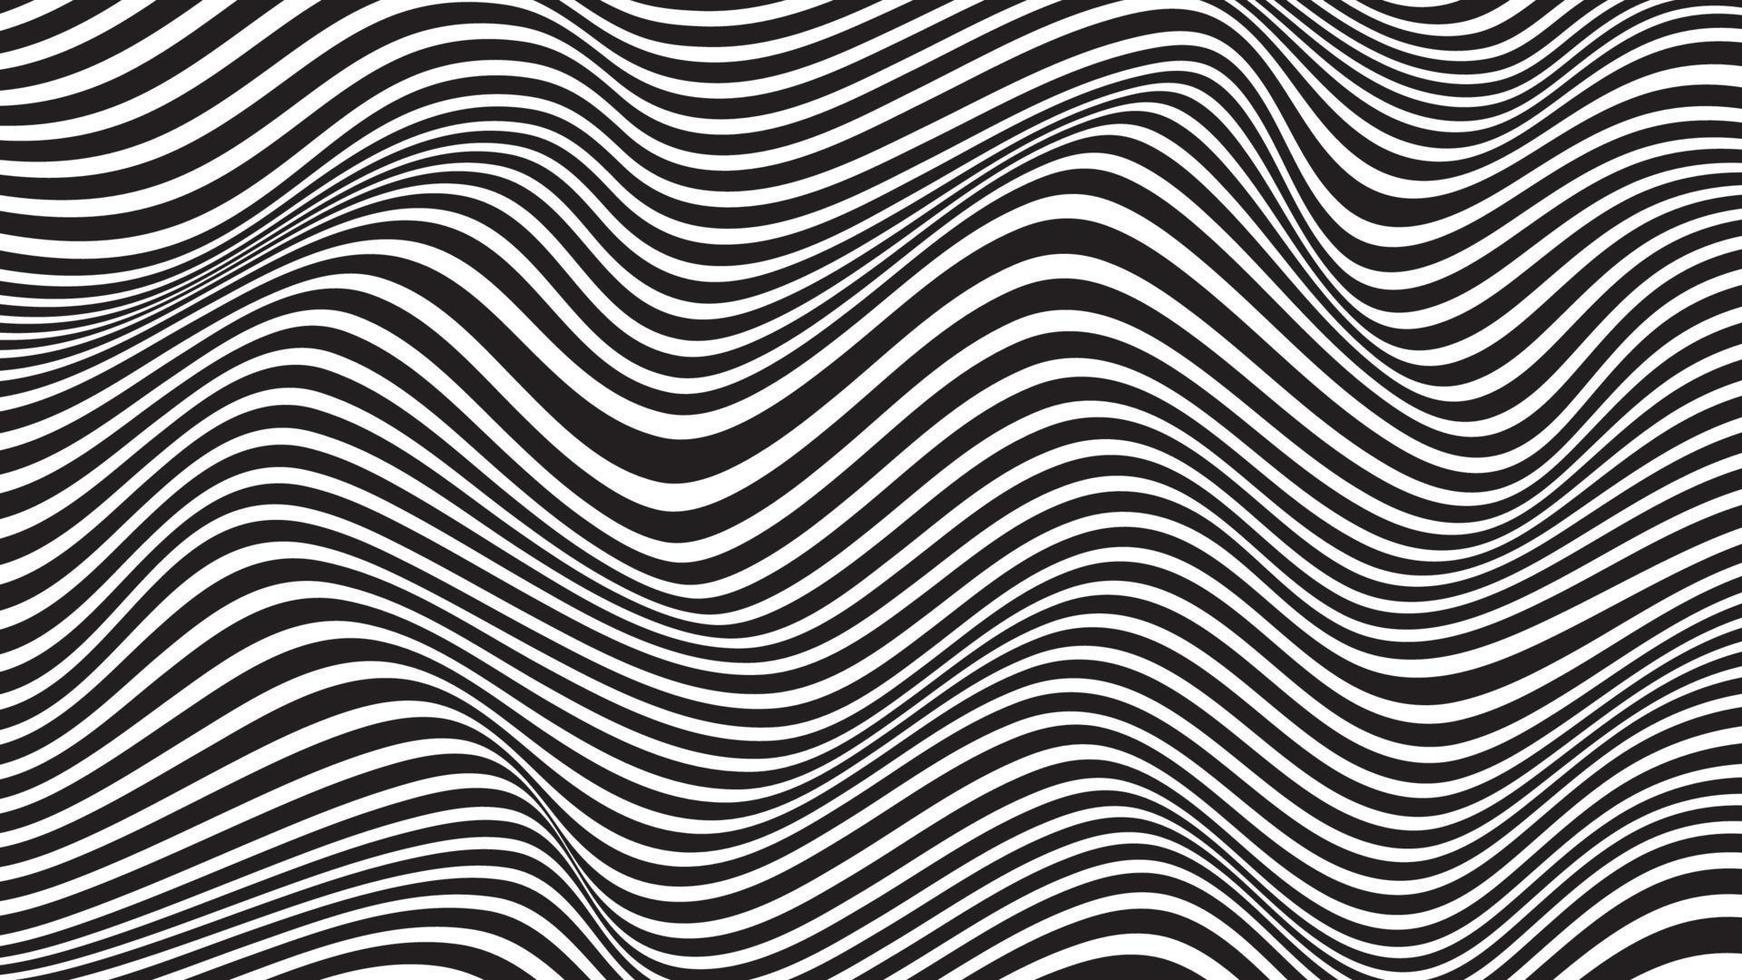 Abstract zig zag line wave background vector